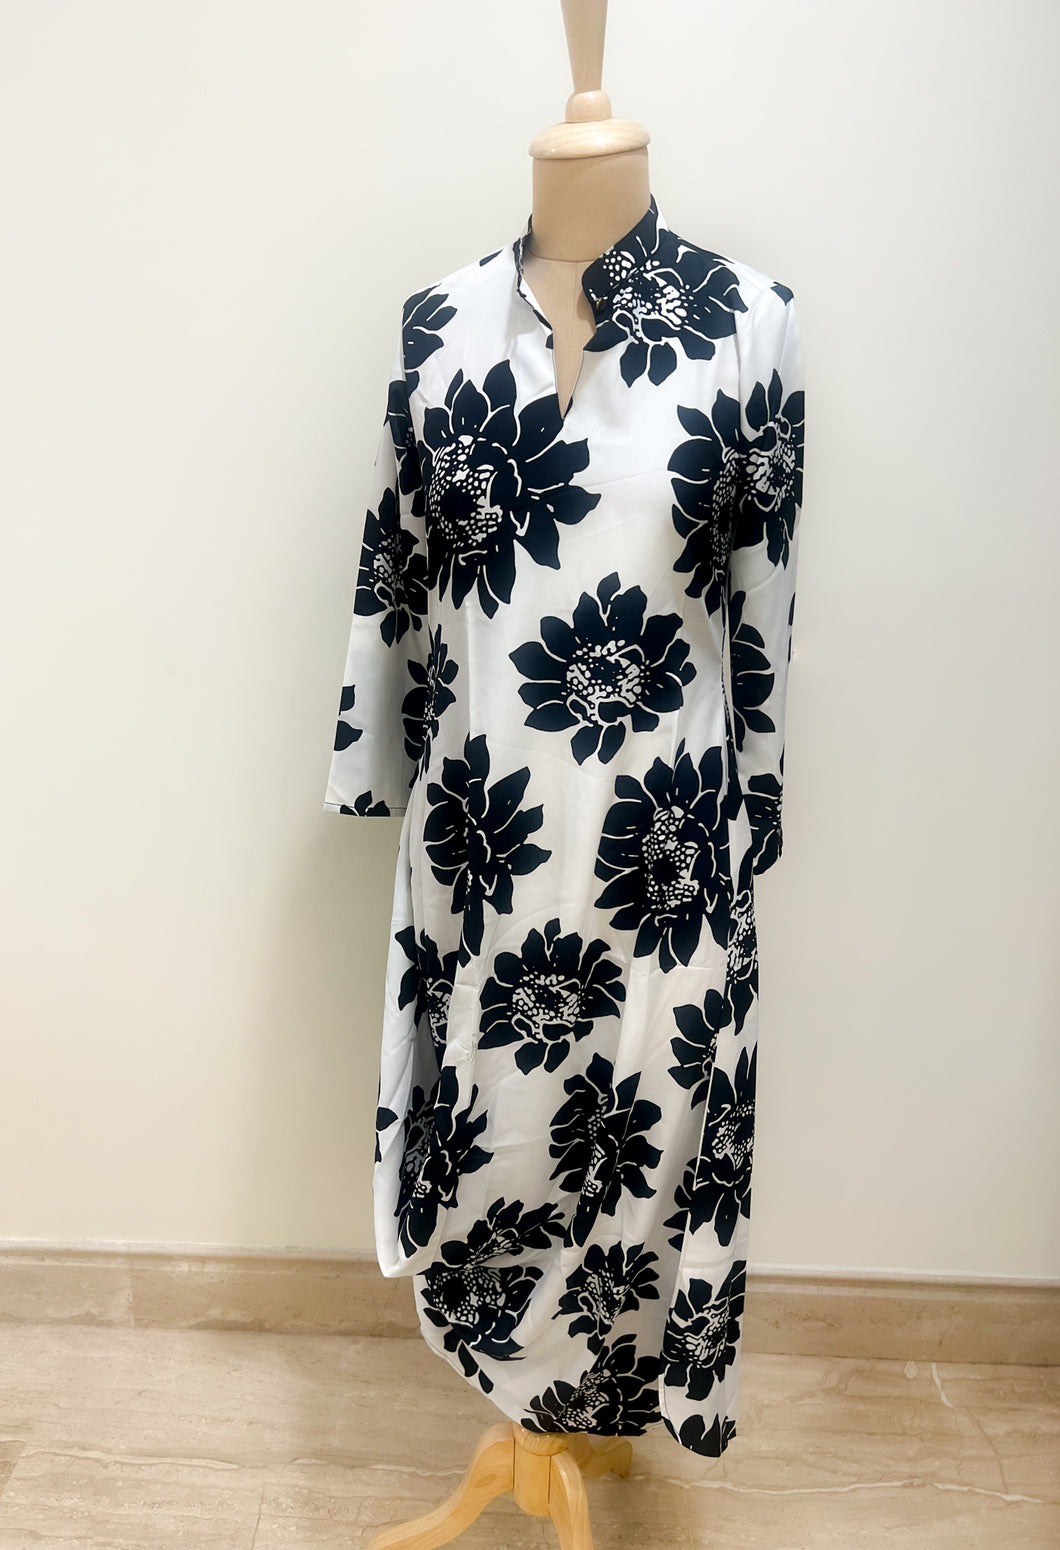 Black floral tunic | READY TO SHIP